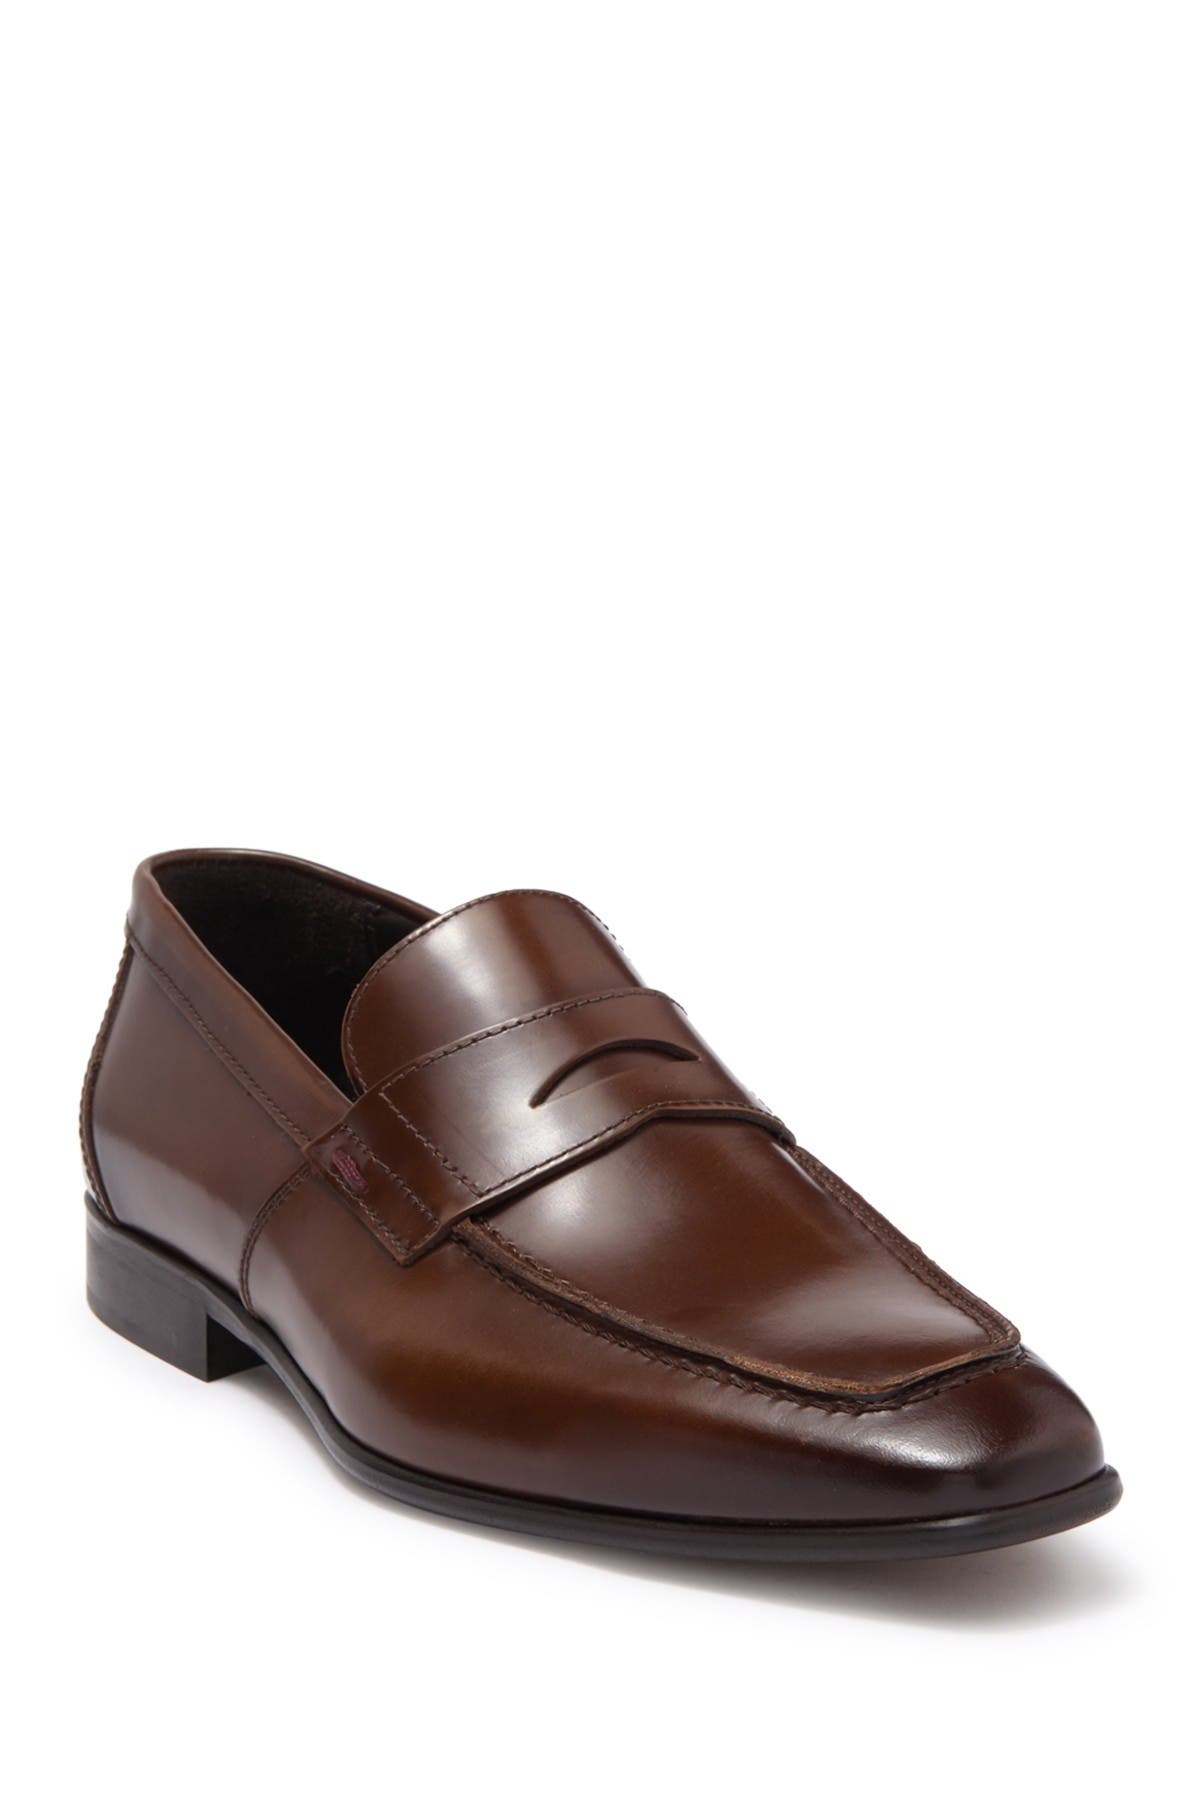 Loafers & Slip-Ons Shoes Bruno Magli Mens Calabria Loafer sandlies.com